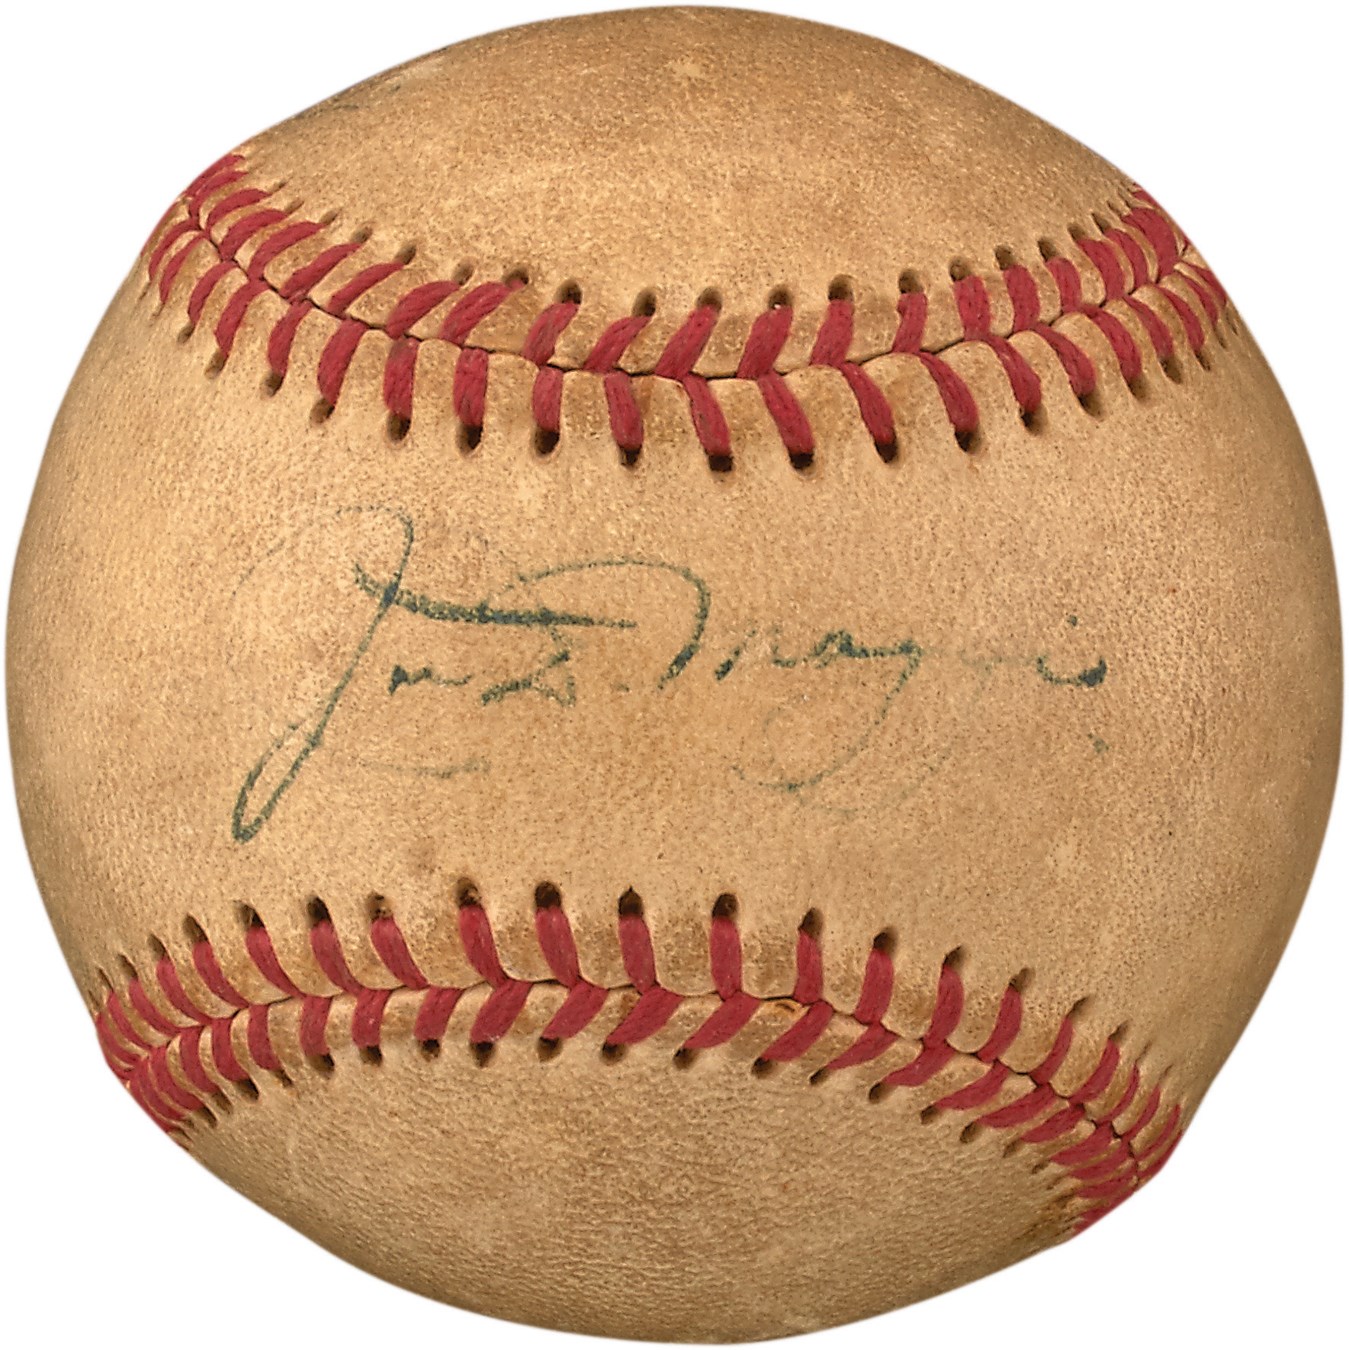 - Joe DiMaggio Vintage Single-Signed 1951 Japan Tour Baseball - Among the Last that He Signed as a Player